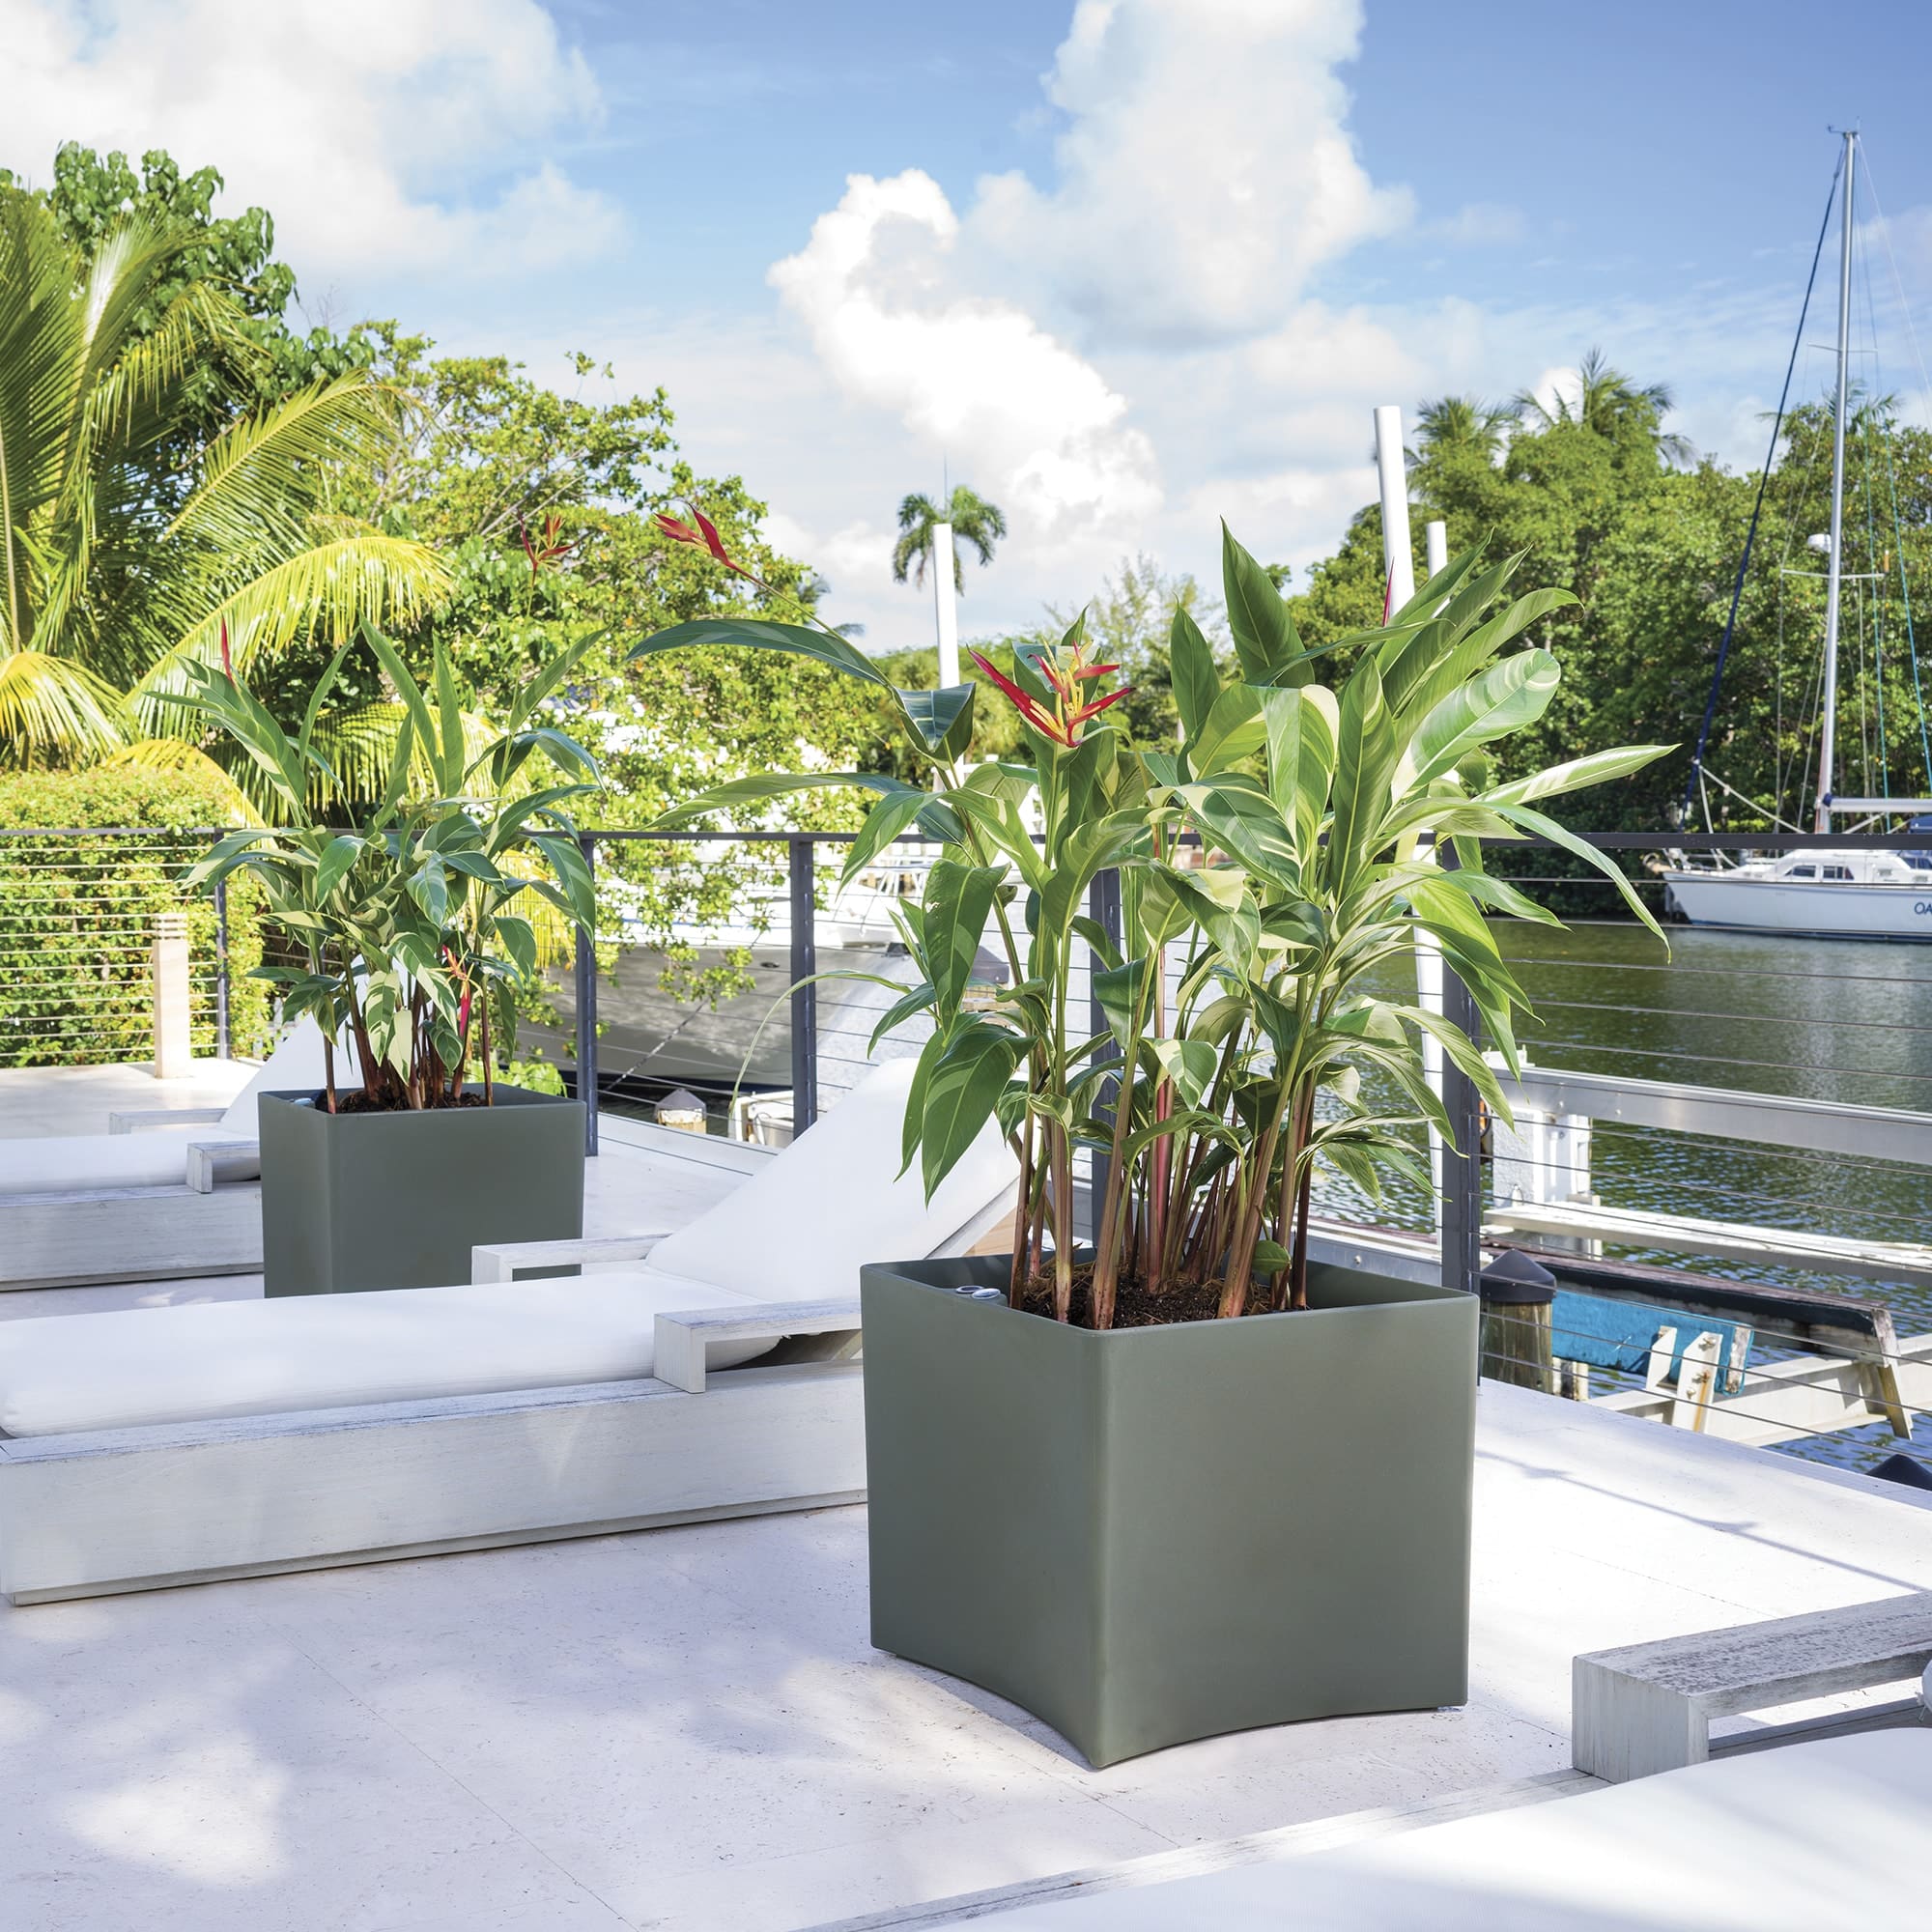 Pinch planters in tropical outdoors.